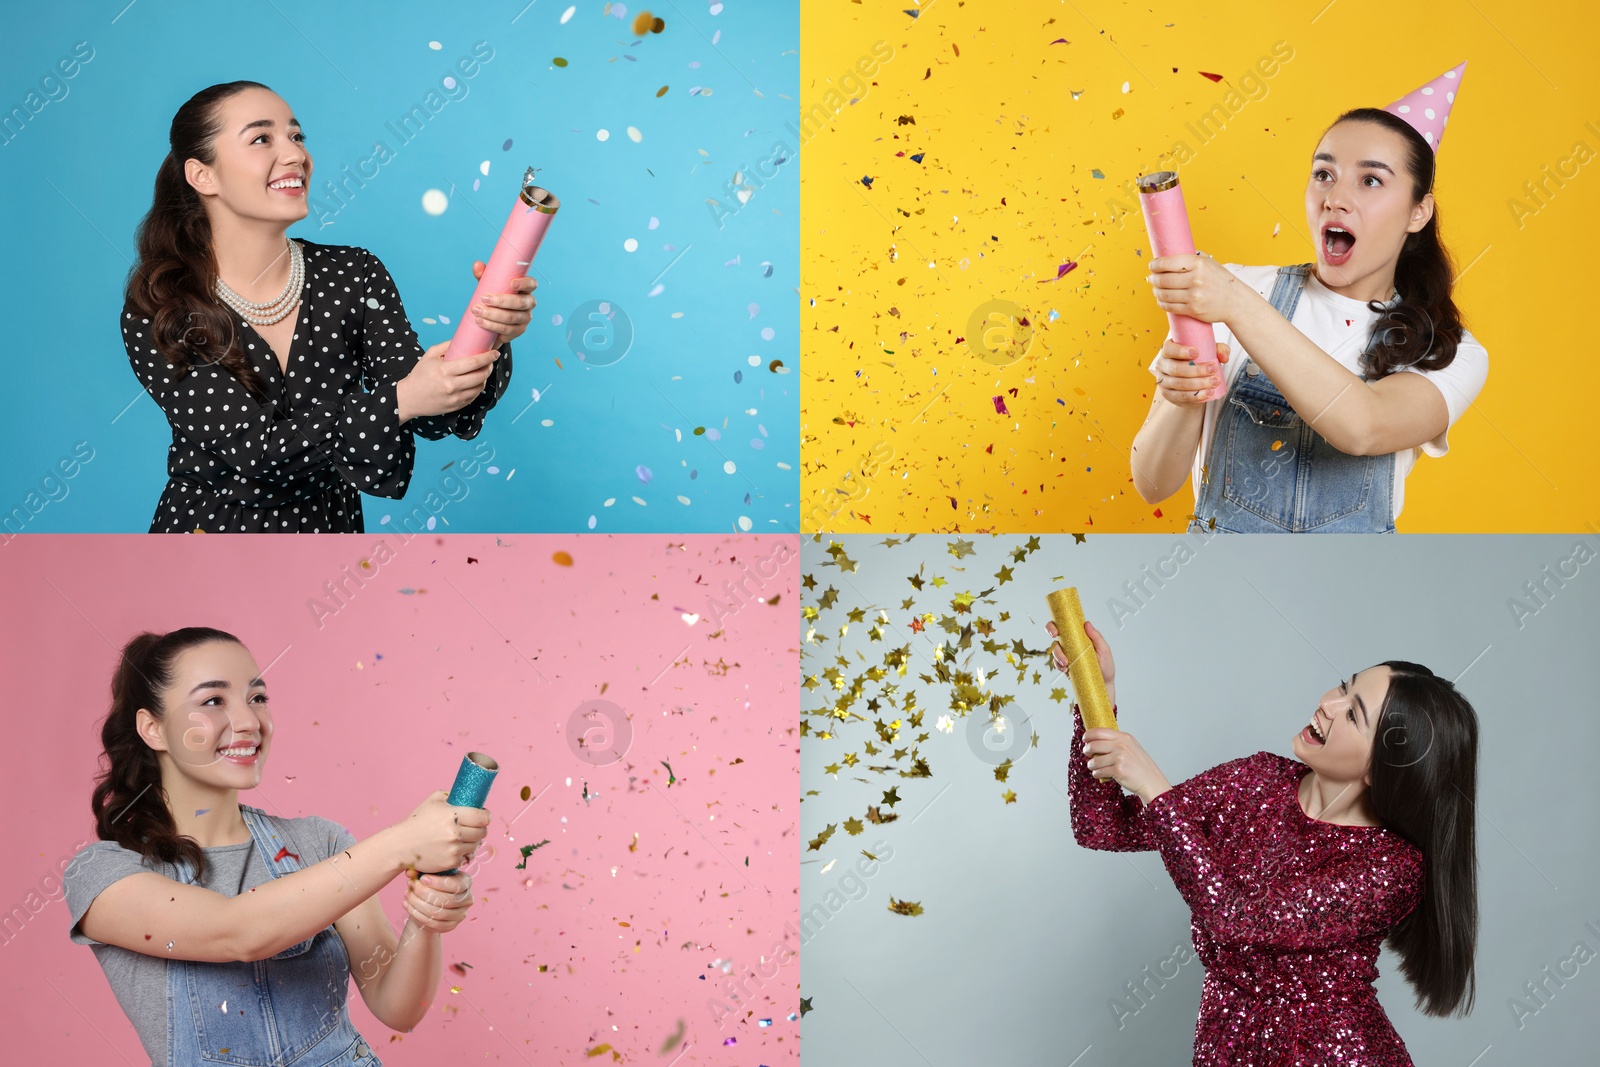 Image of Collage with photos of beautiful women blowing up party poppers on different color backgrounds